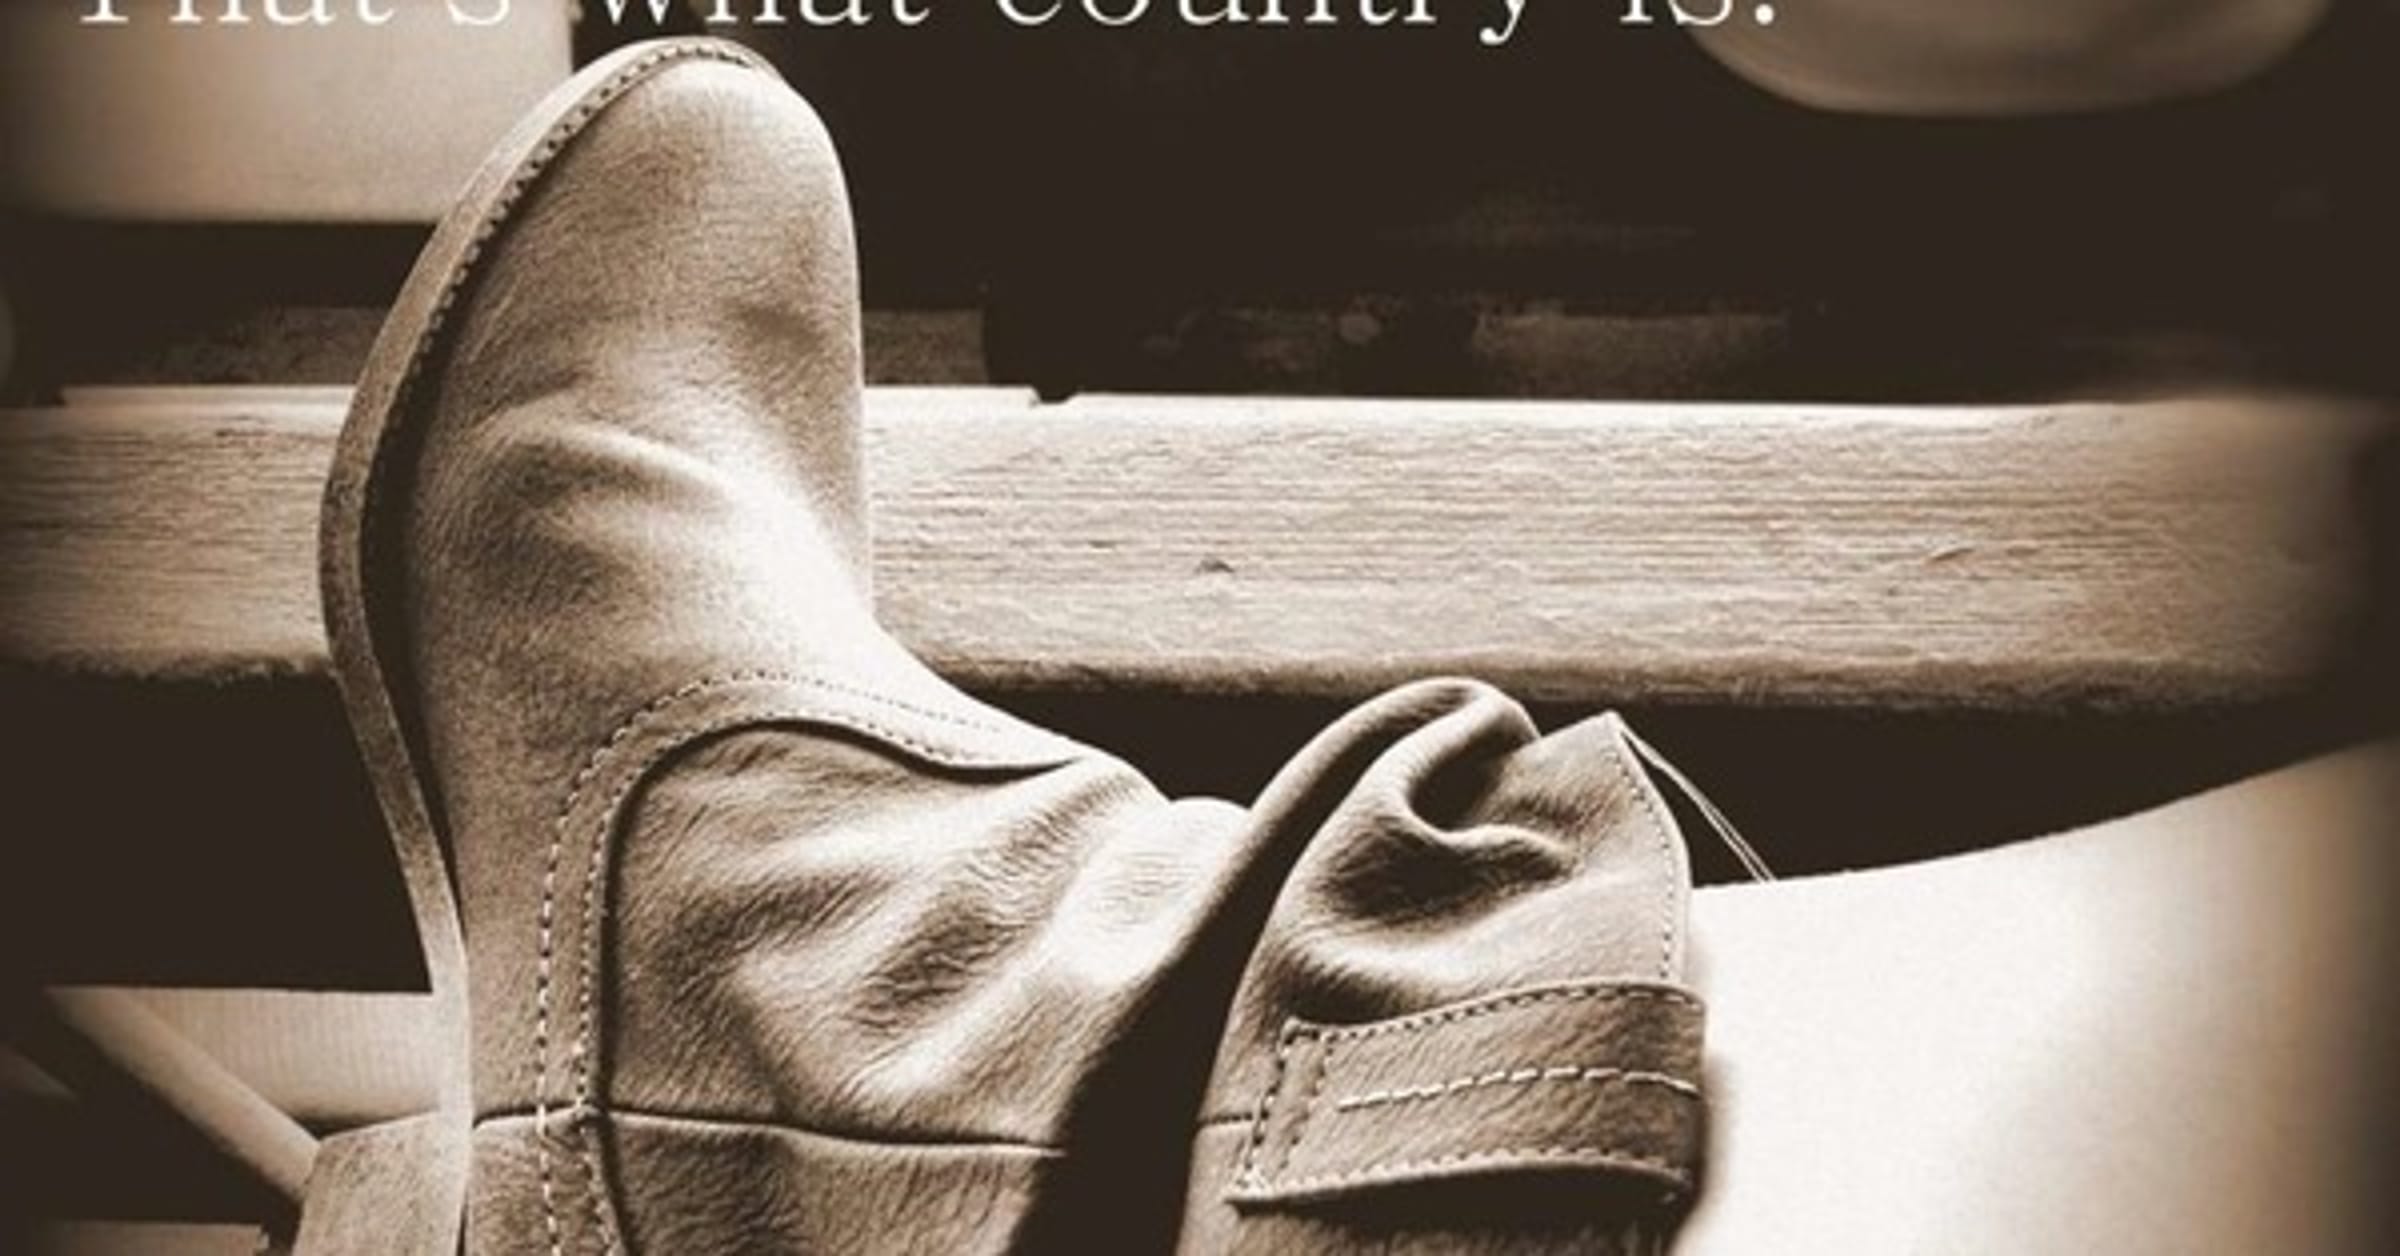 40 Saddest Country Songs of All Time